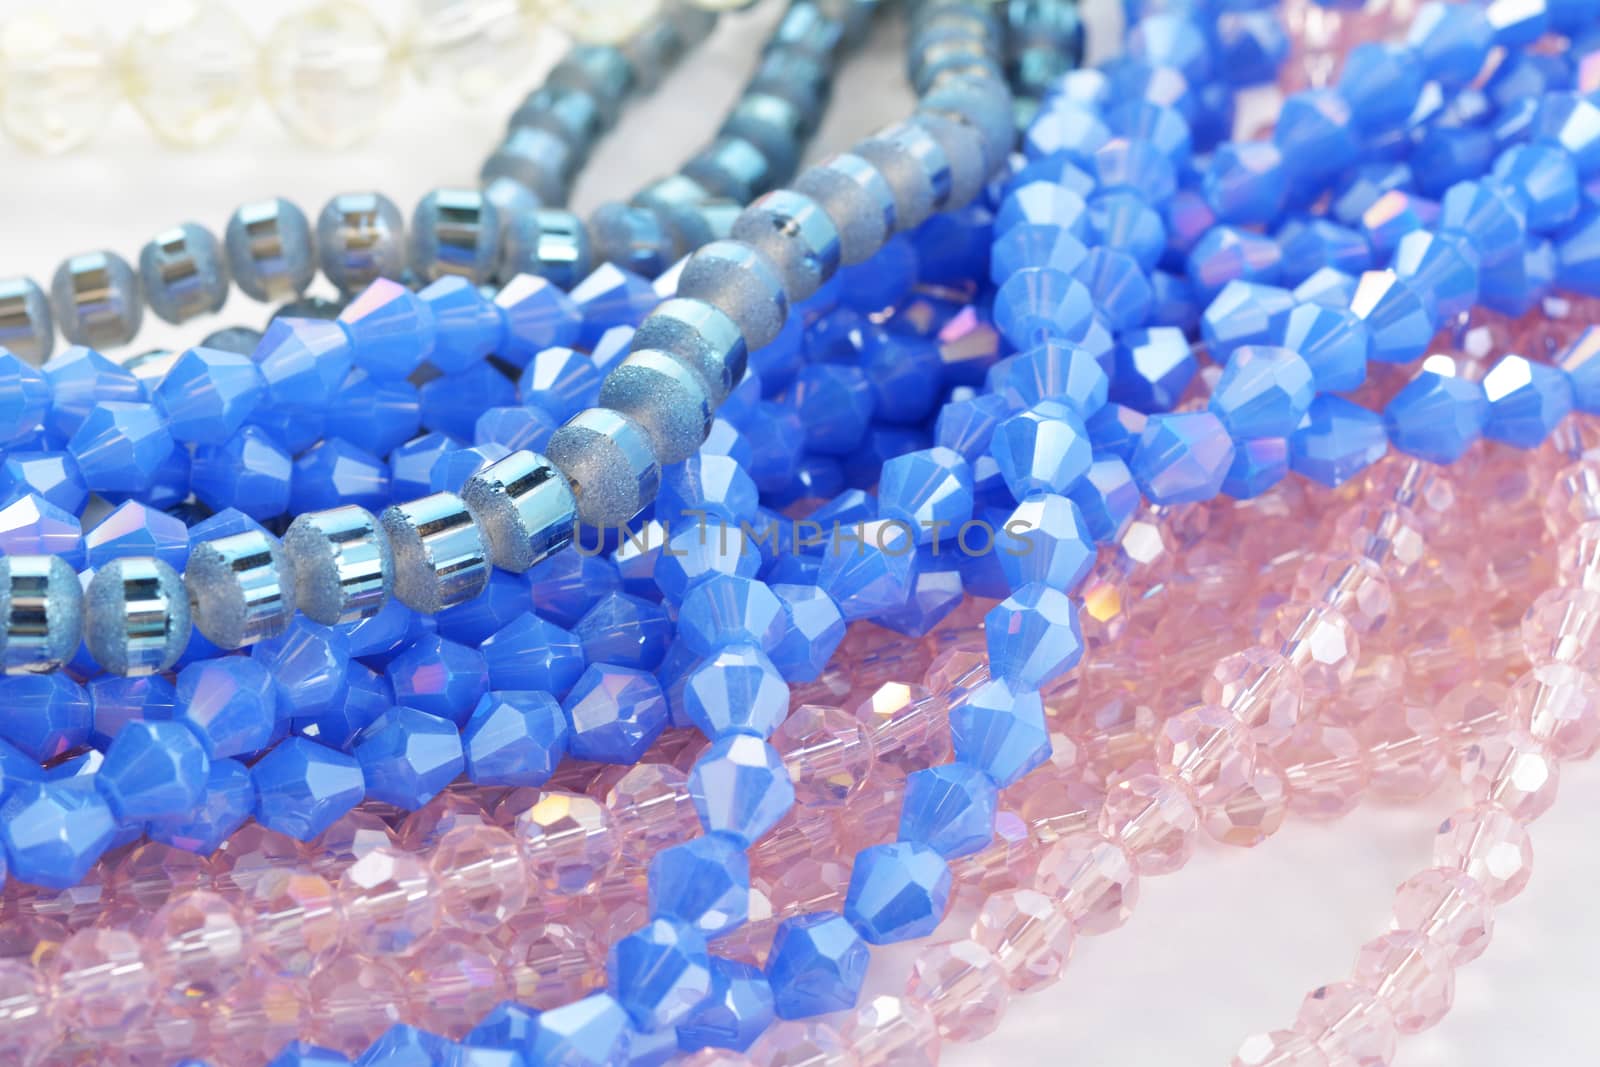 Color faceted glass sparkle beads. Materials for creative work on white background. by polyats